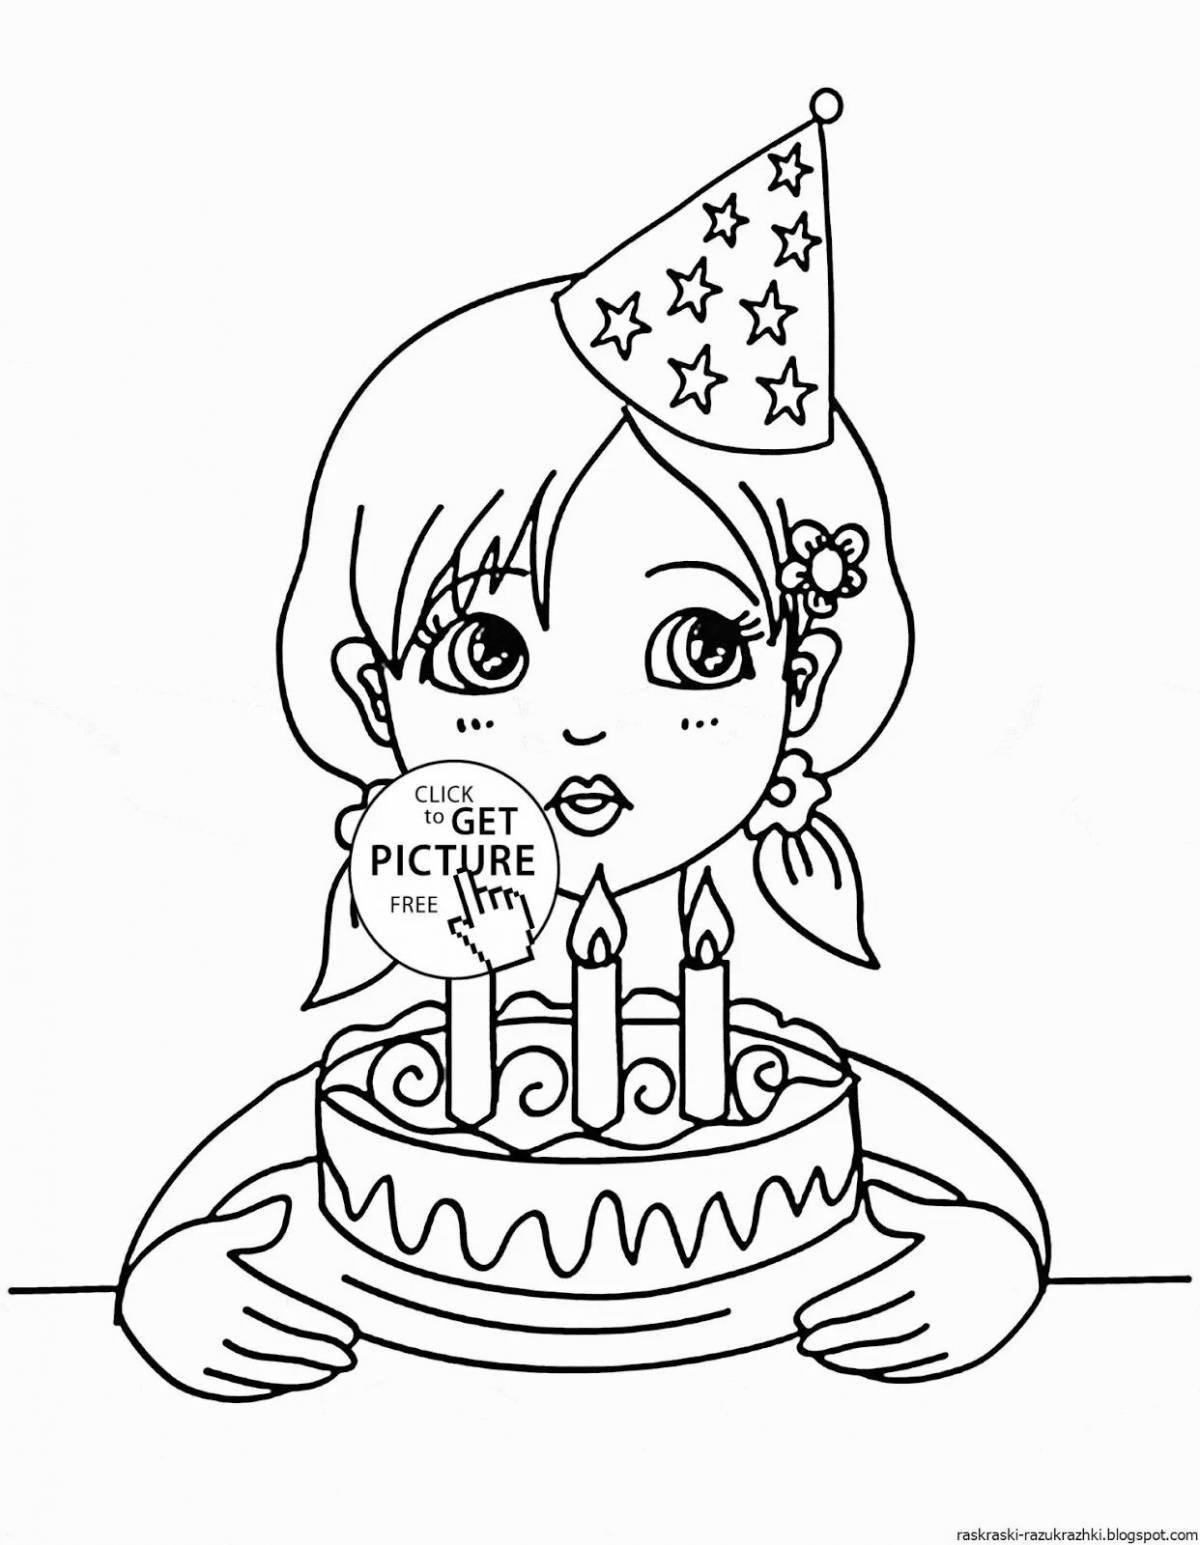 Exquisite cake coloring for girls